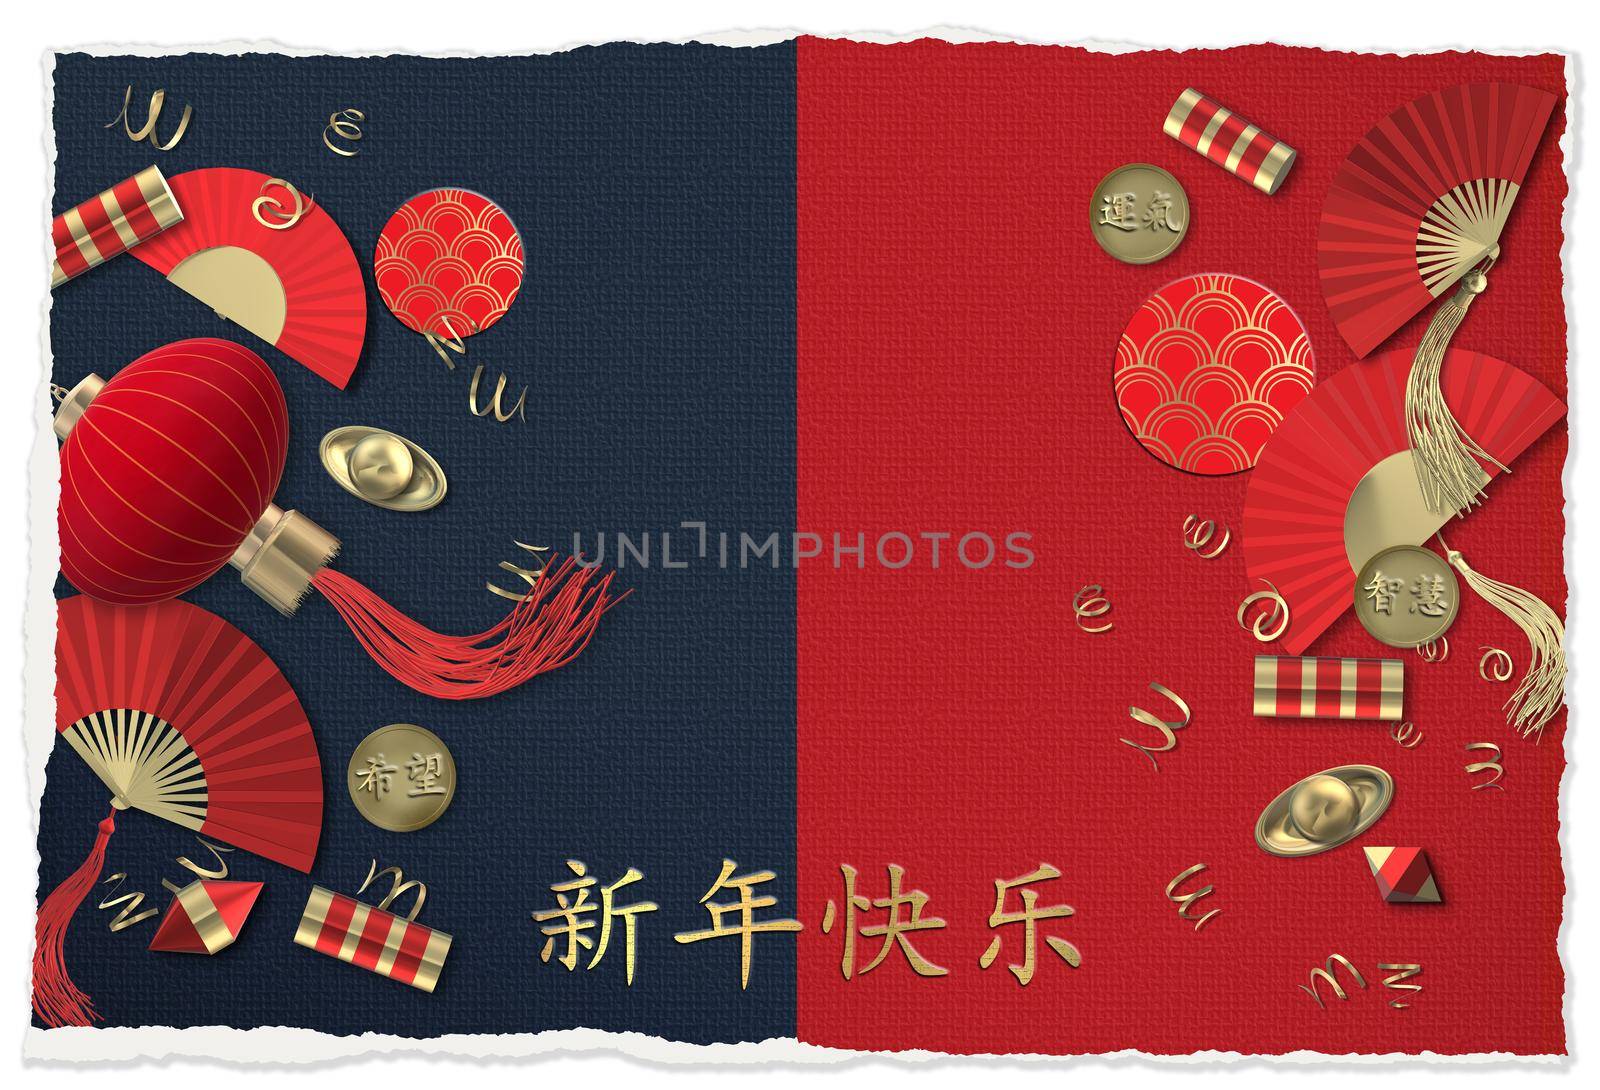 Chinese new year. Lantern, fans, crackers. Oriental Asian symbols on red blue. Lucky envelopes coins with text Chinese translation Luck, Hope, Wisdom. Gold Chinese text Happy New Year. 3D render